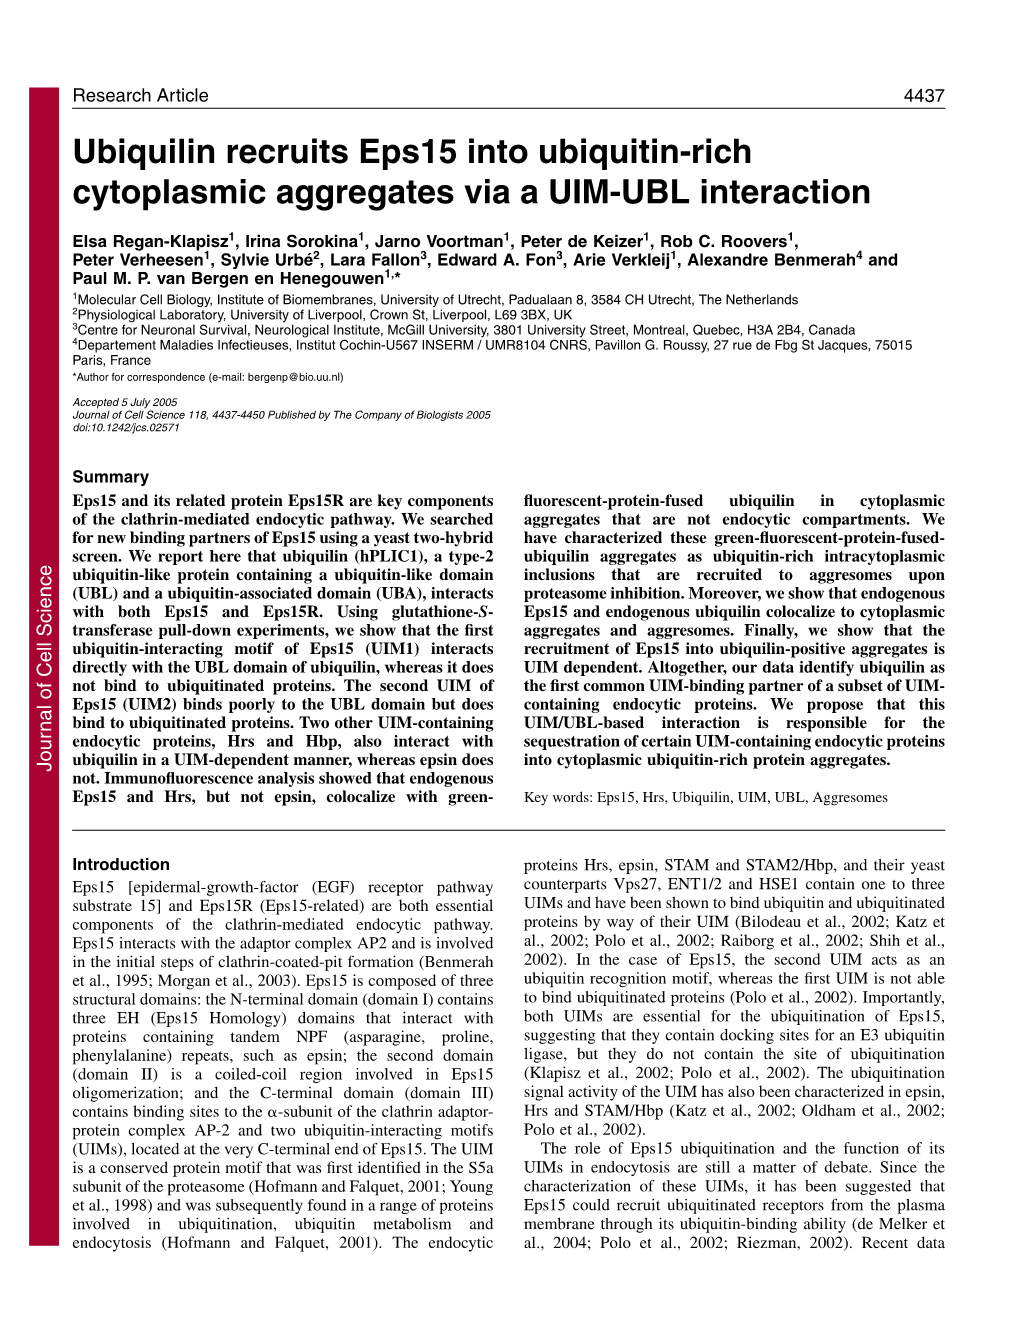 Ubiquilin Recruits Eps15 Into Ubiquitin-Rich Cytoplasmic Aggregates Via a UIM-UBL Interaction